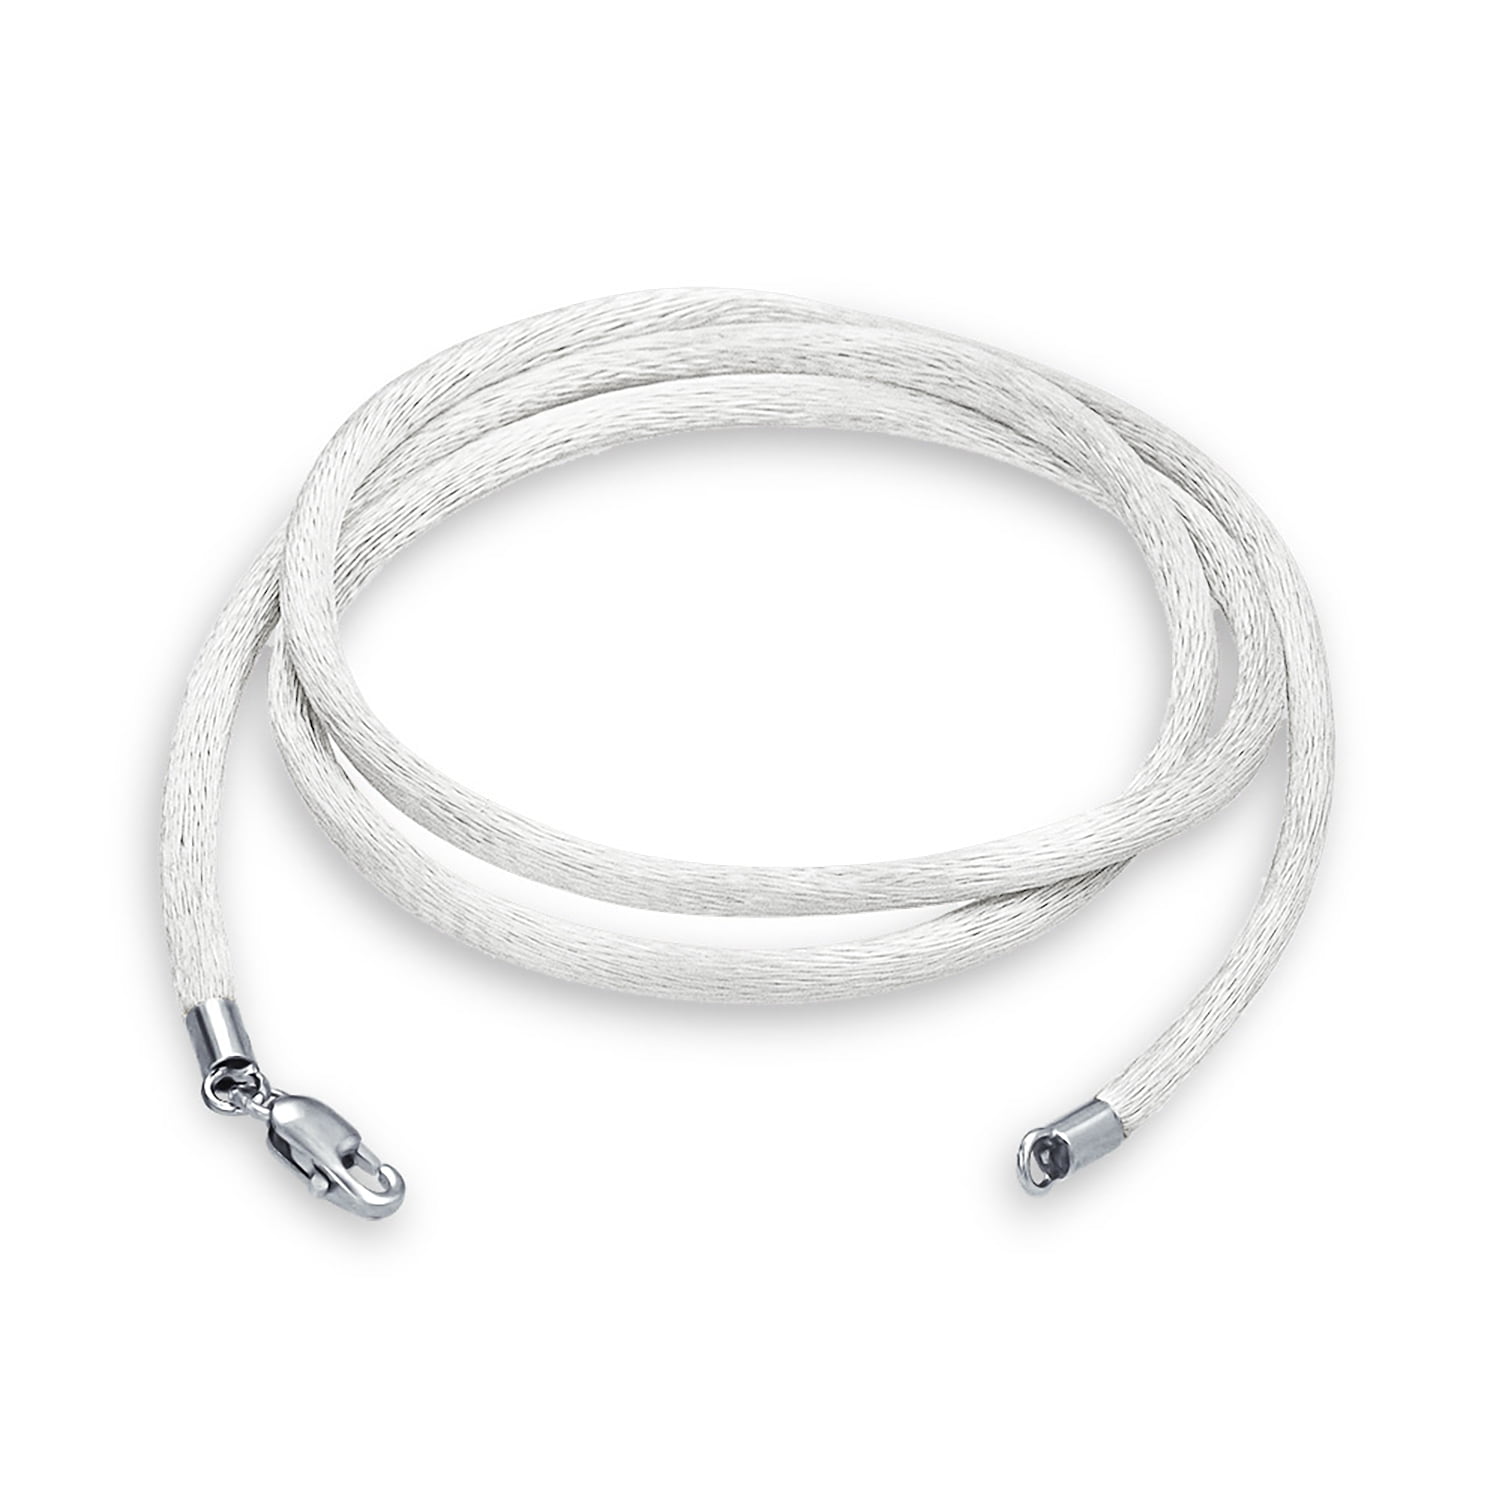 Extra thin satin necklace cords 14-36 inches